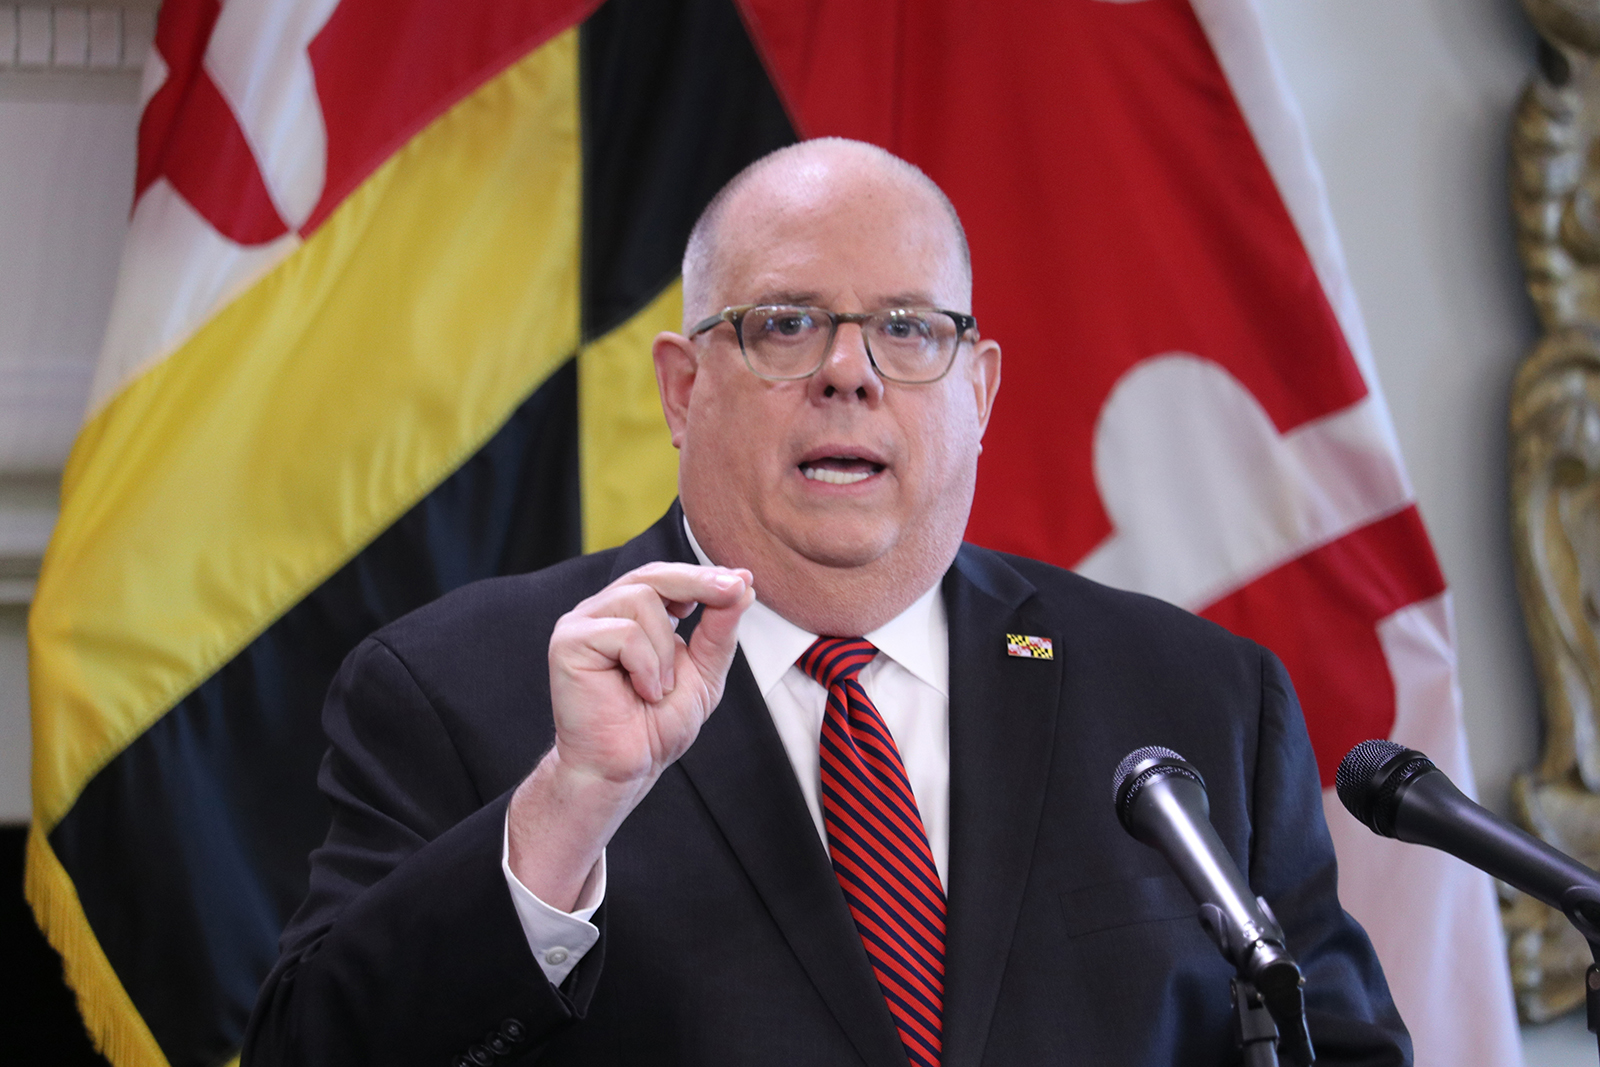 FILE - In this June 3, 2020 file photo Maryland Gov. Larry Hogan speaks during a news conference in Annapolis, Md. Gov. Hogan will be stepping down as the chairman of the the bipartisan National Governors Association. New York Gov. Andrew Cuomo takes the reins of the group representing the nation’s governors, which has played a pivotal role in communicating with the Trump administration about state needs during the coronavirus pandemic. (AP Photo/Brian Witte, file)